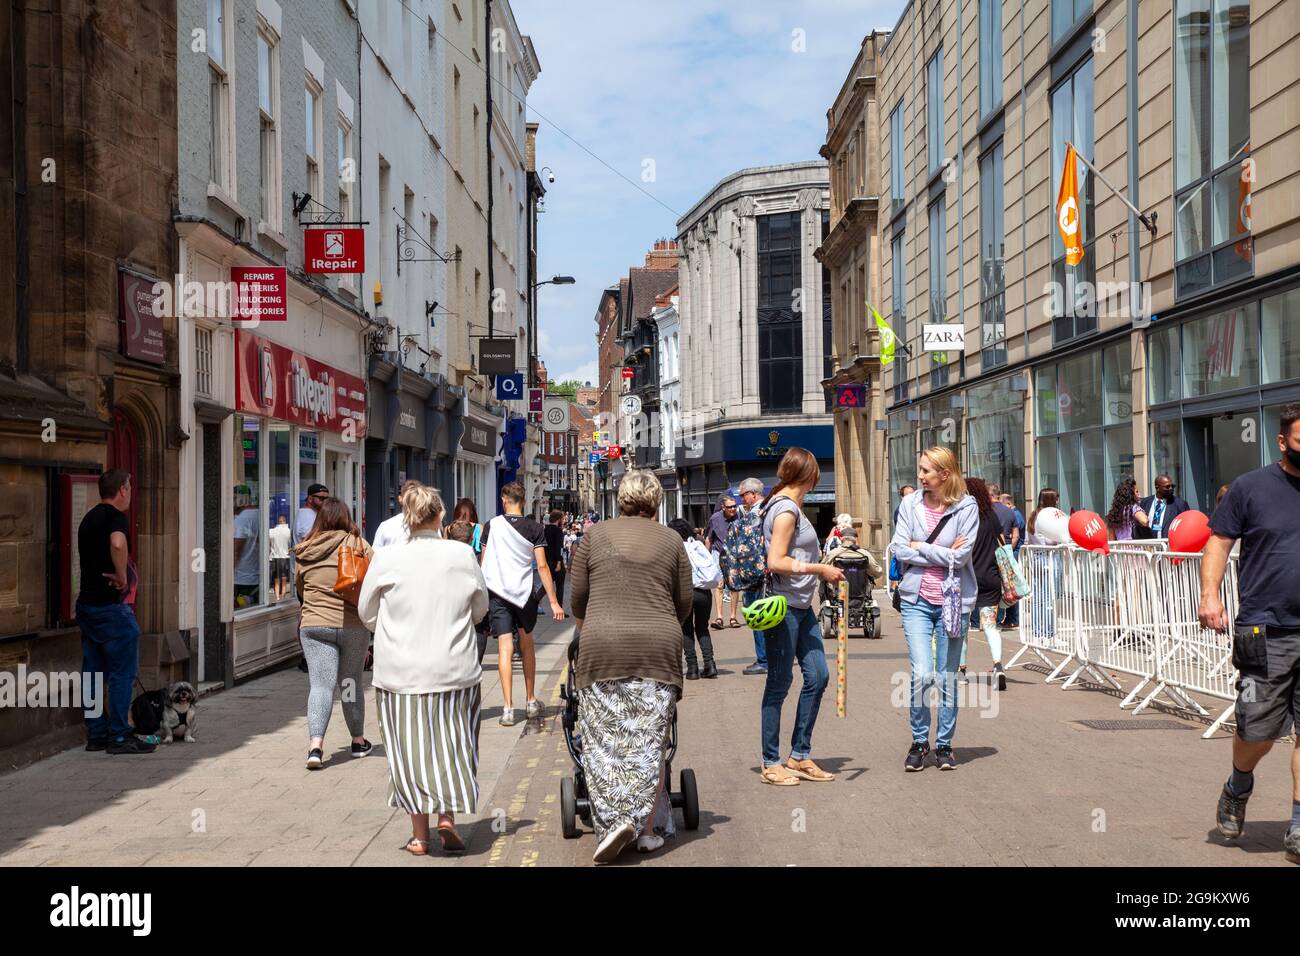 People Visitoing Shops on Spurriergate in York, UK Stock Photo